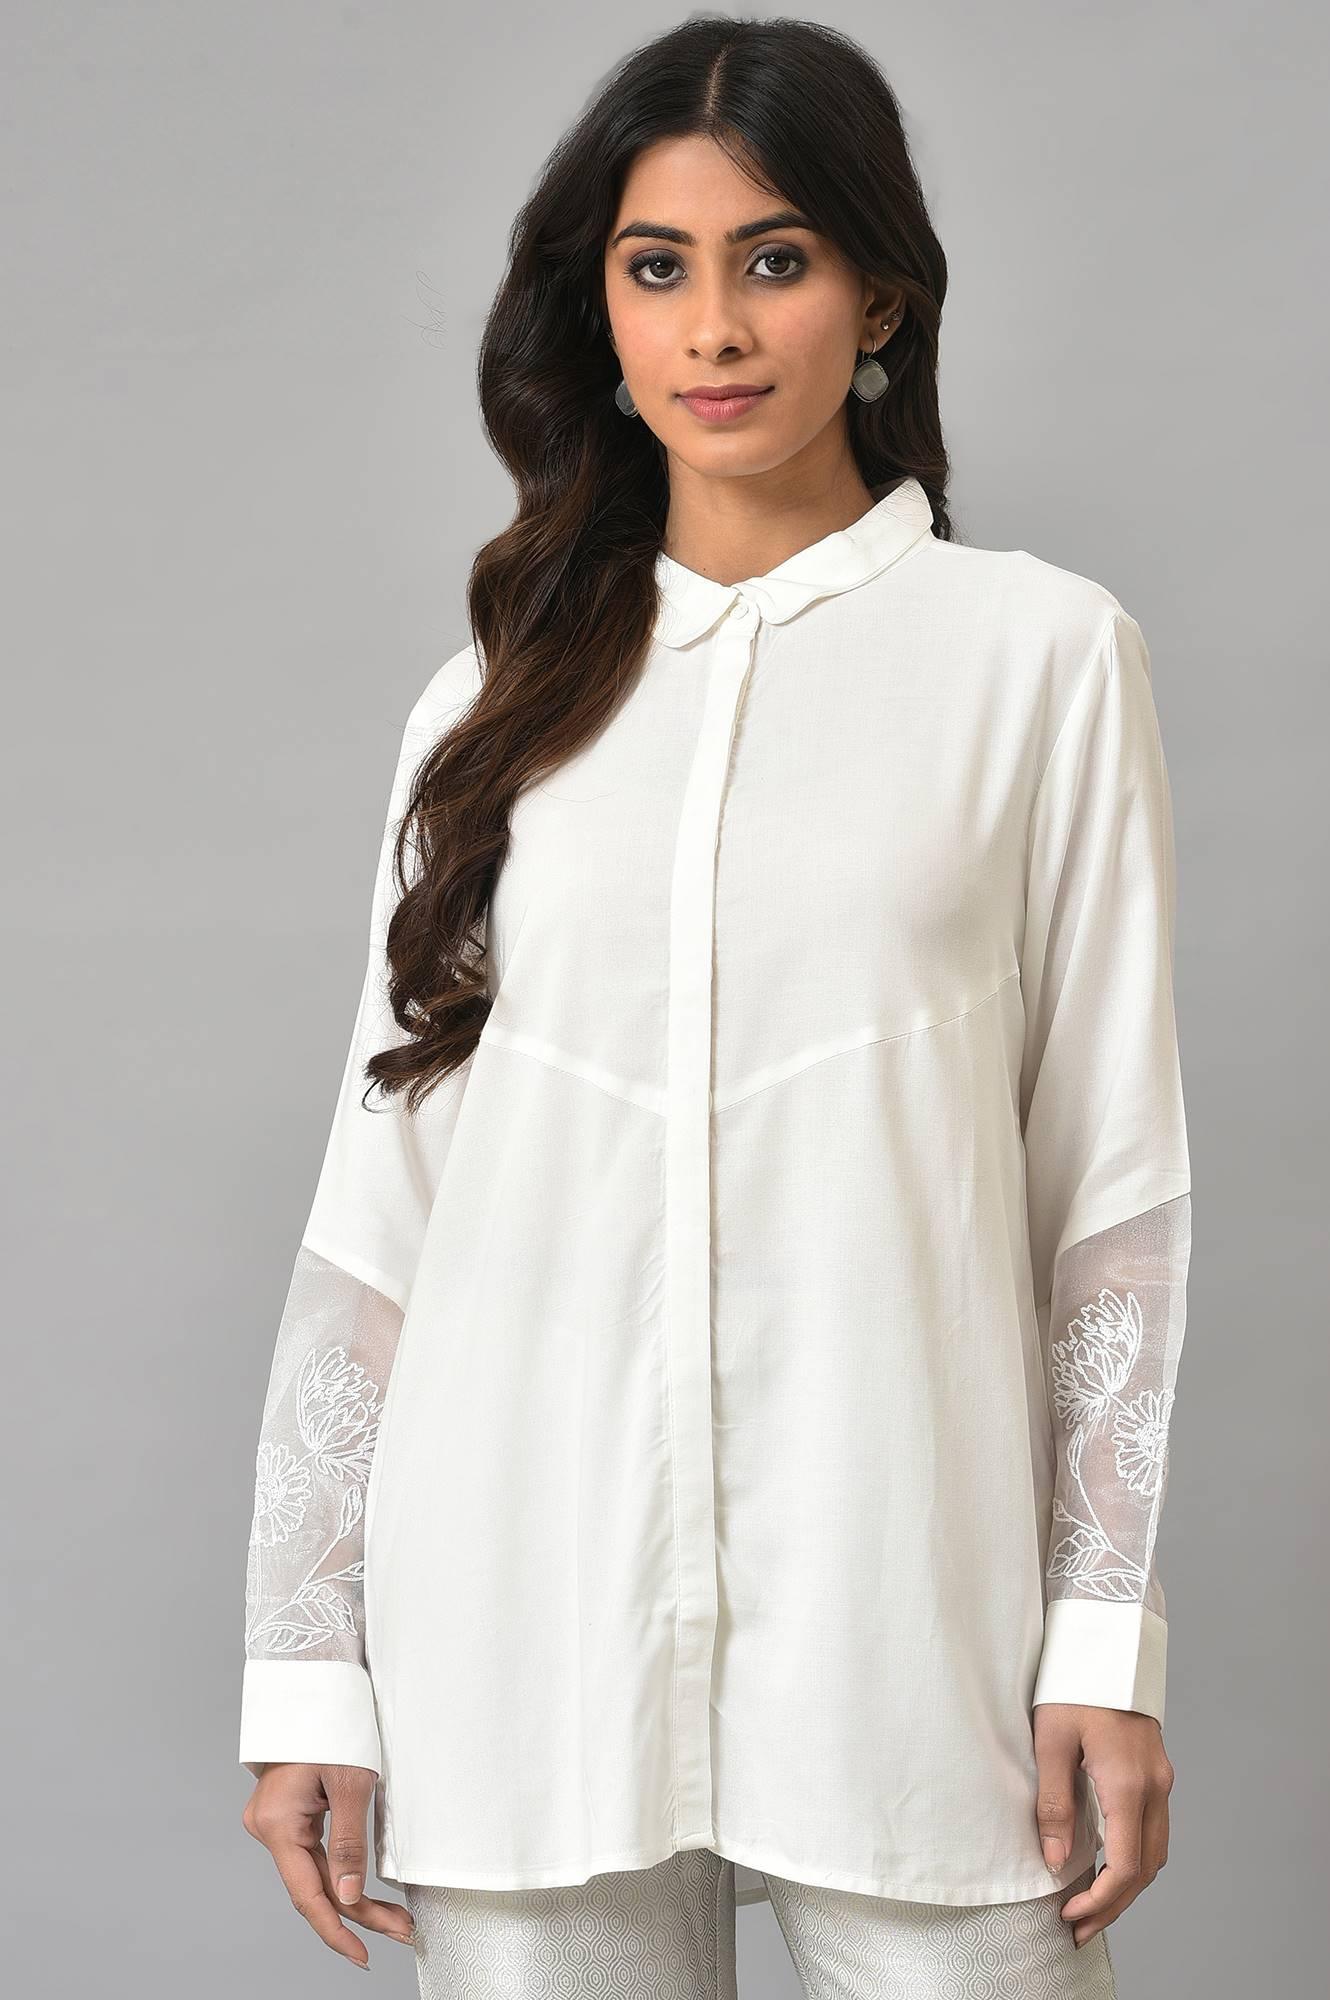 White Panelled Shirt With Embroidered Organza Sleeves - wforwoman